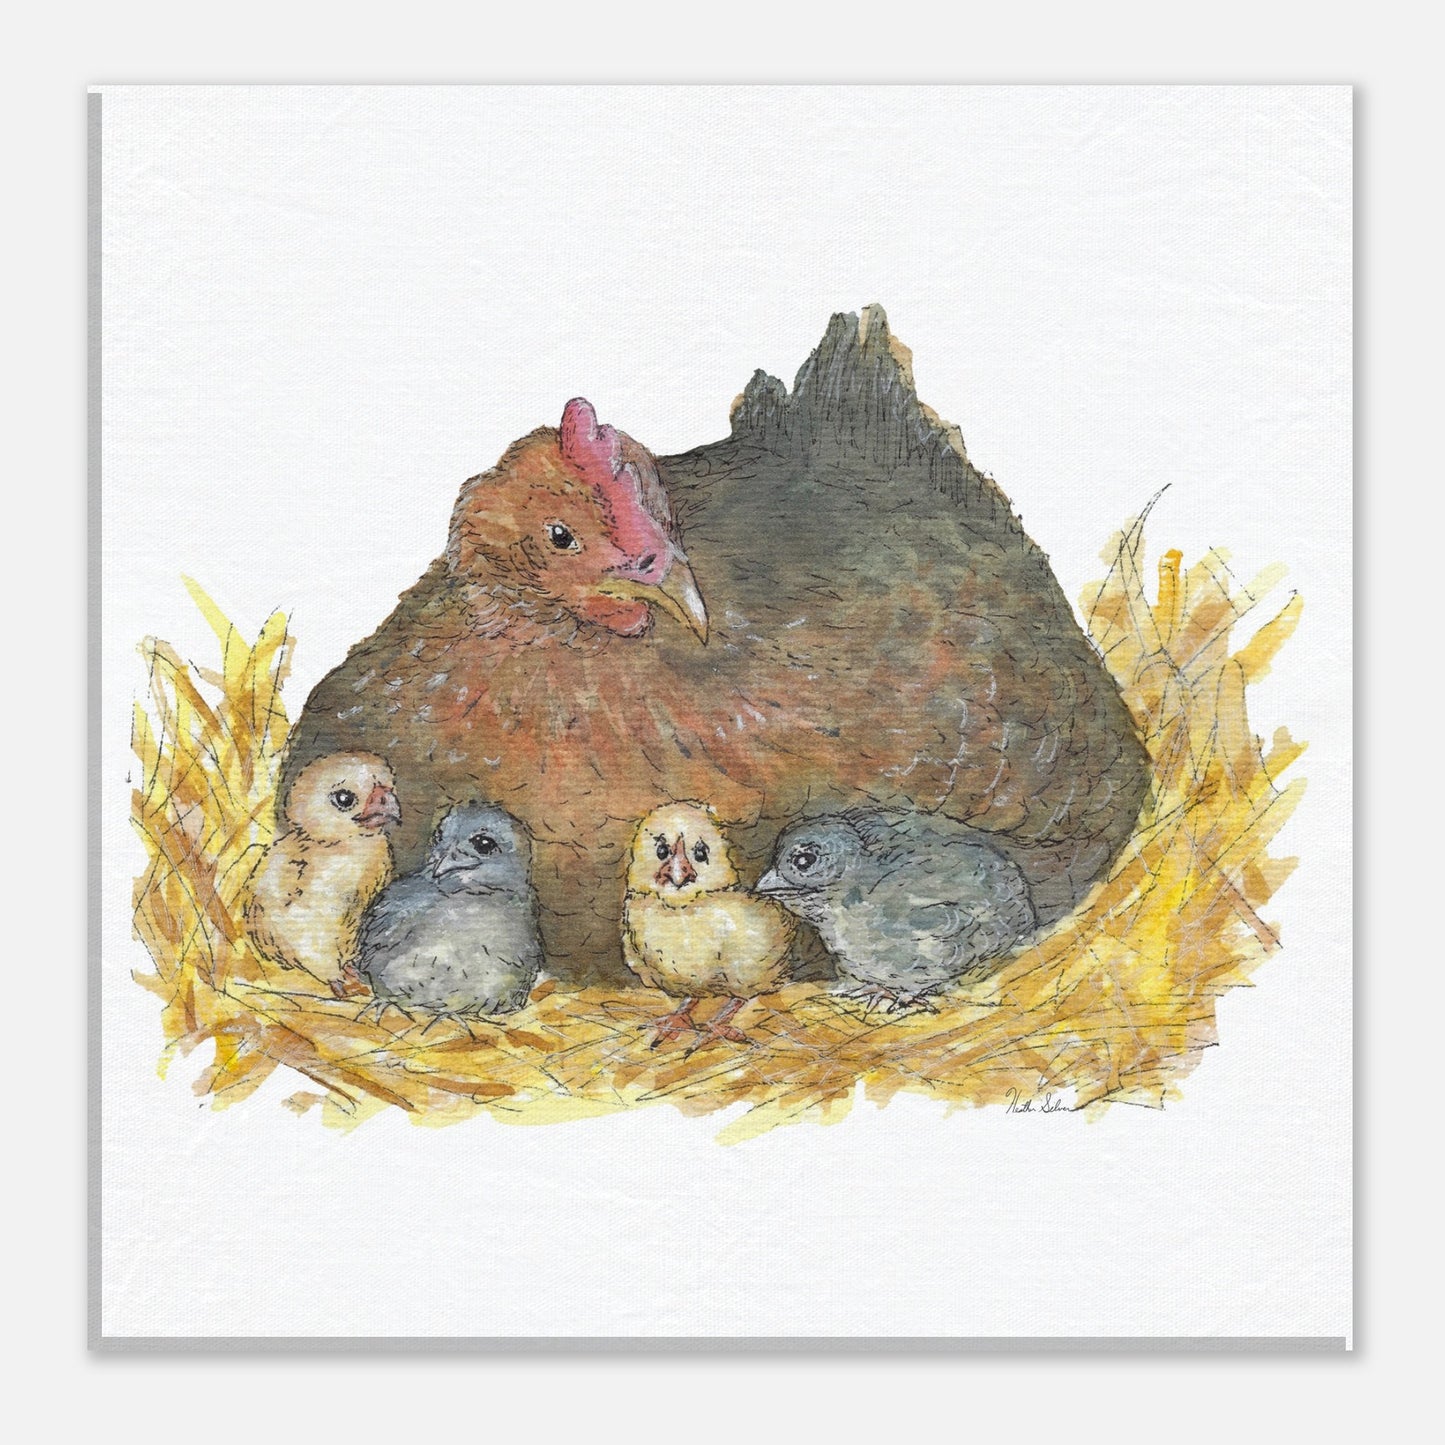 20 by 20 inch slim canvas Mother Hen print. Features a watercolor mother hen and her four chicks in a nest.